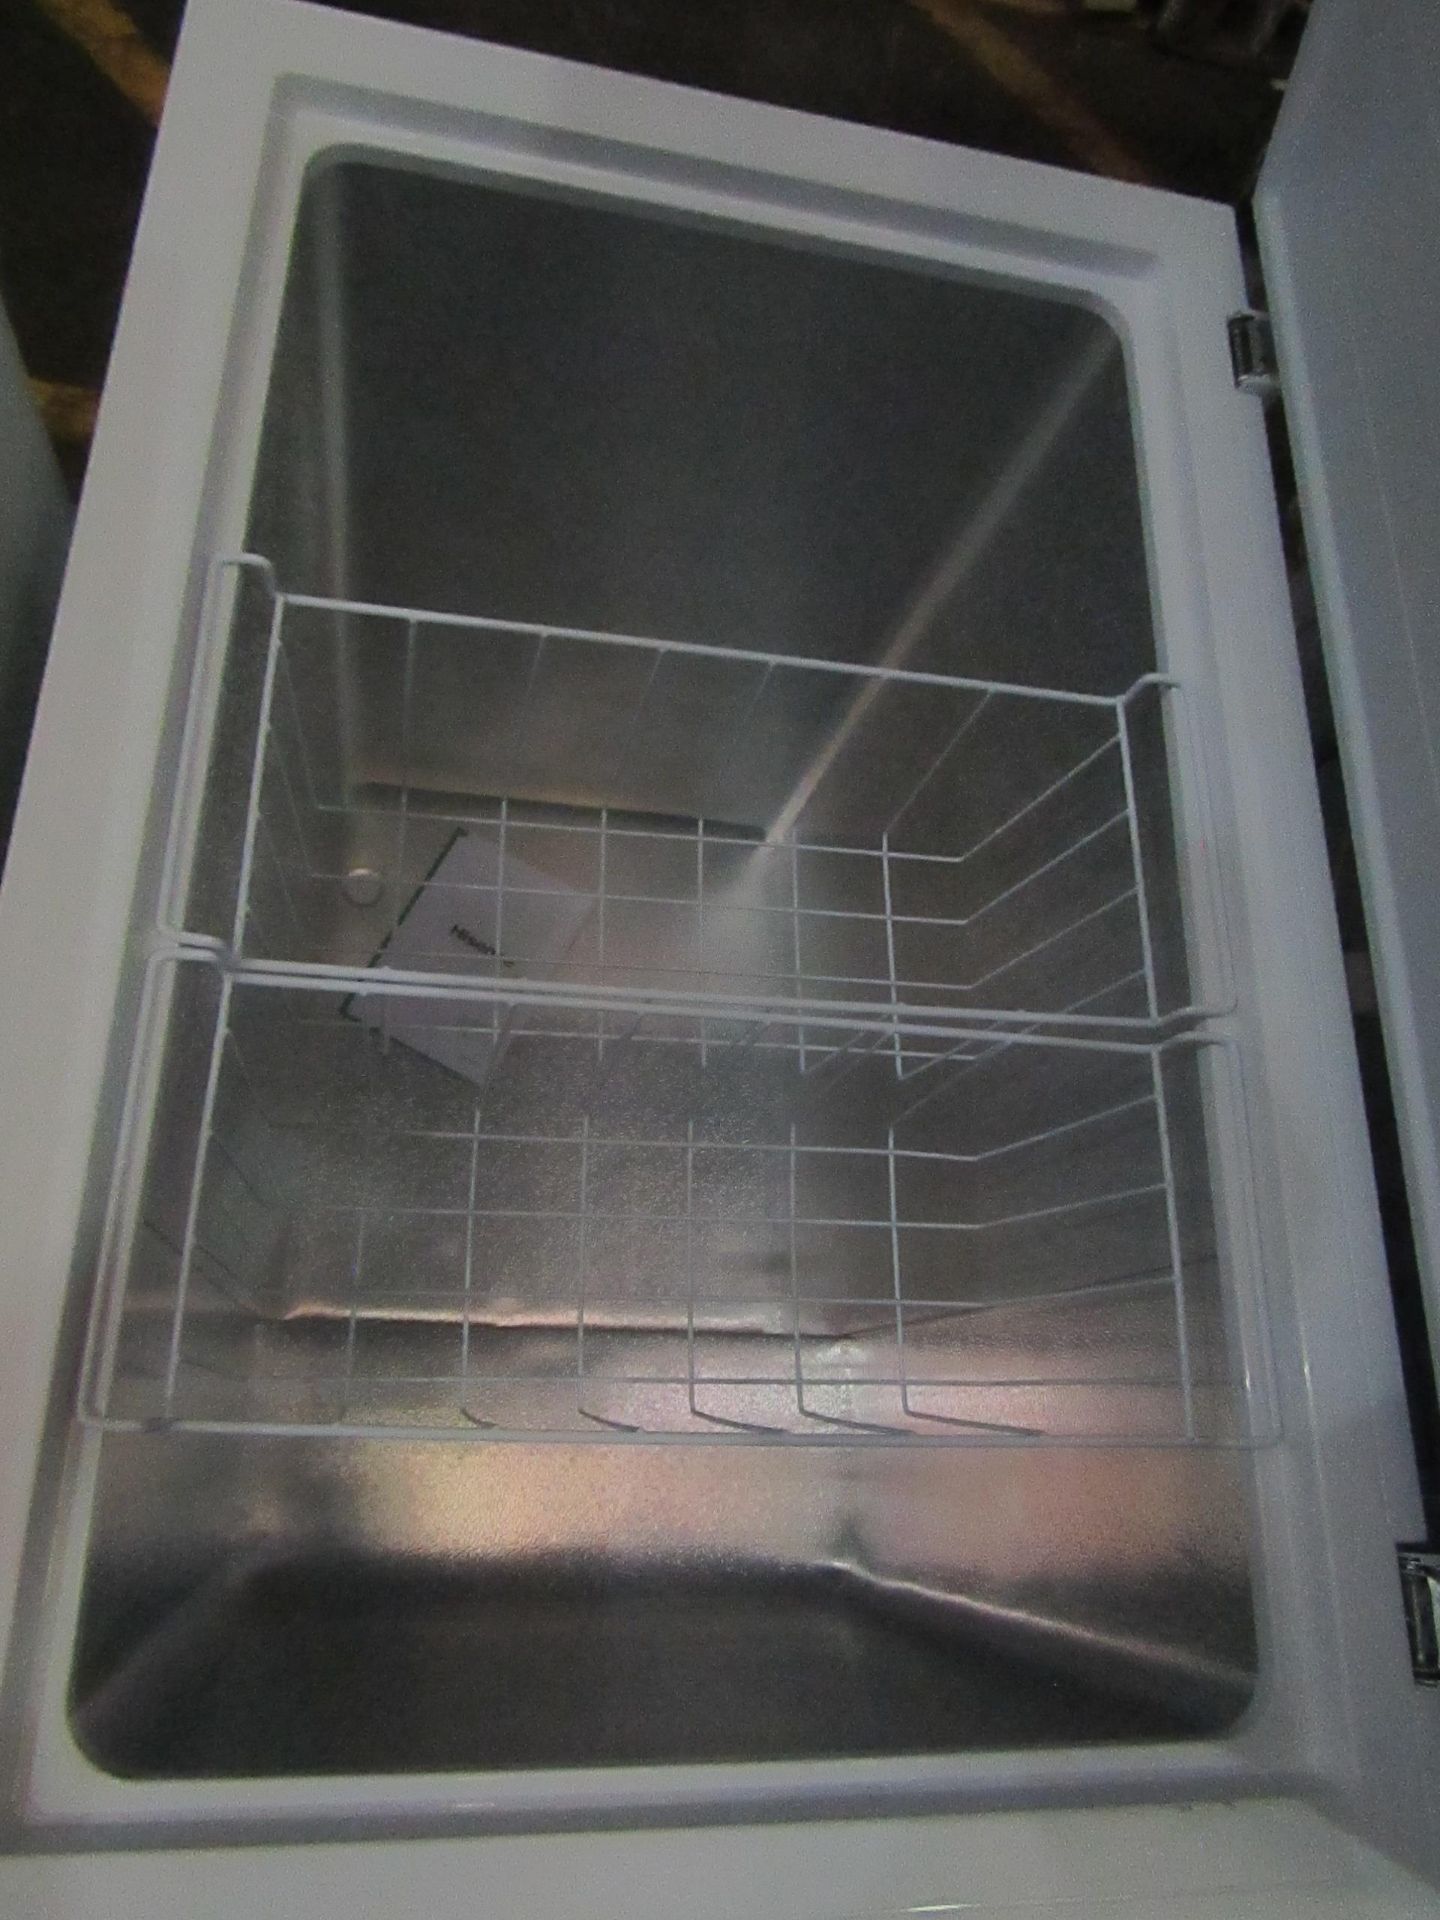 Hisense chest freezer, tested working and clean with handle - Image 2 of 2